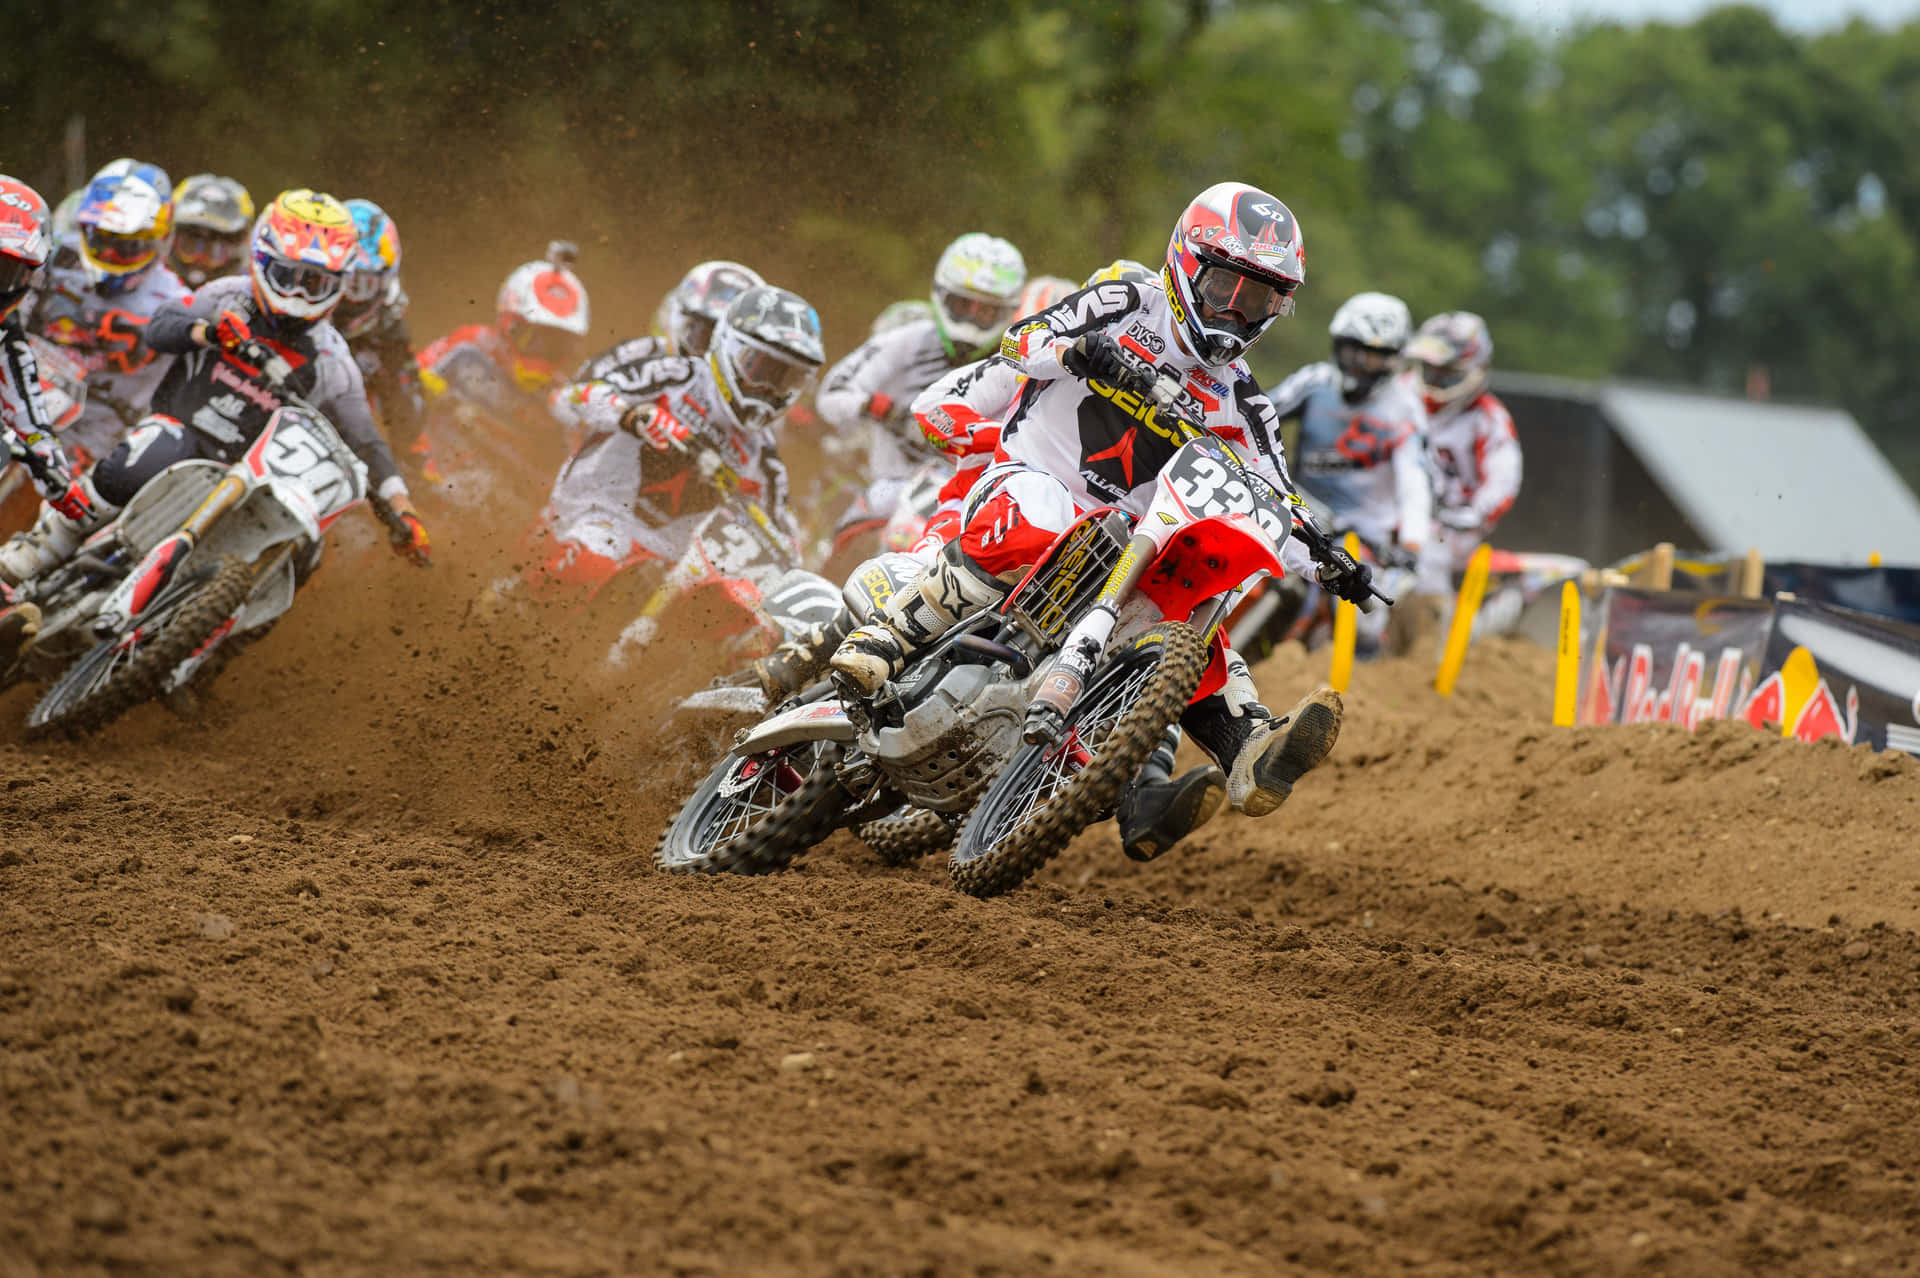 A Group Of Dirt Bikers Racing On A Dirt Track Wallpaper